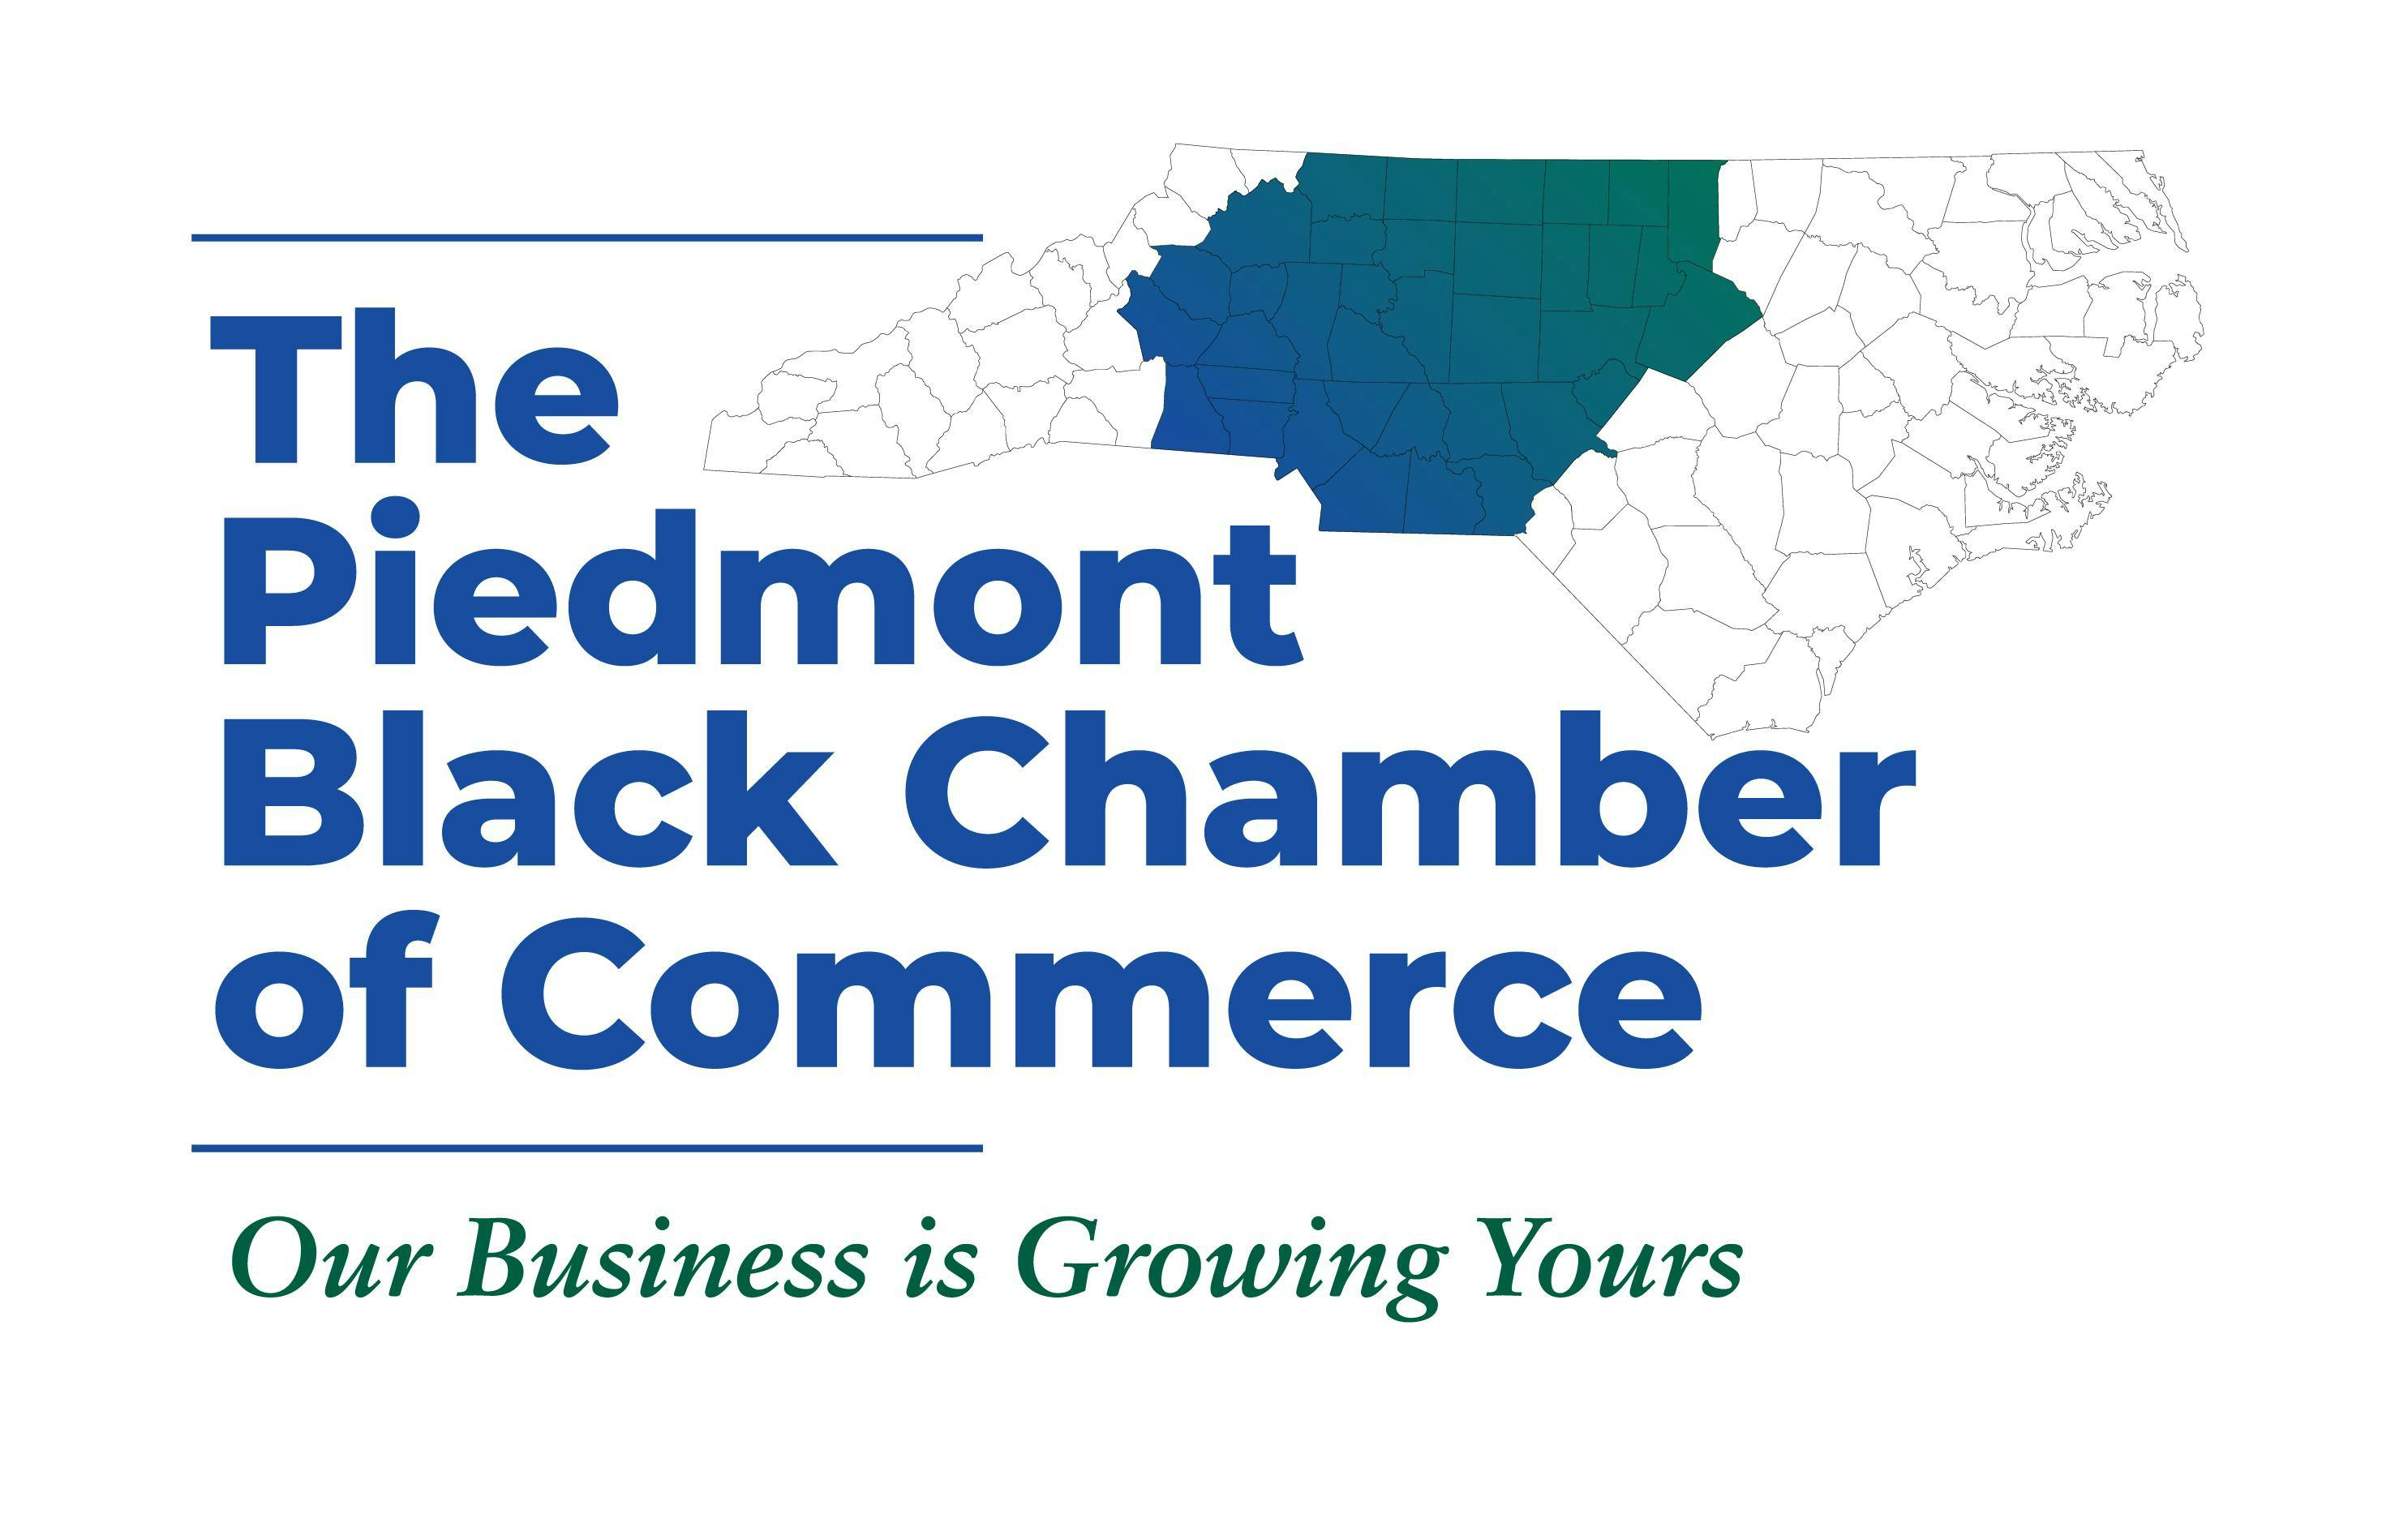  The Piedmont Black Chamber of Commerce Networking Event